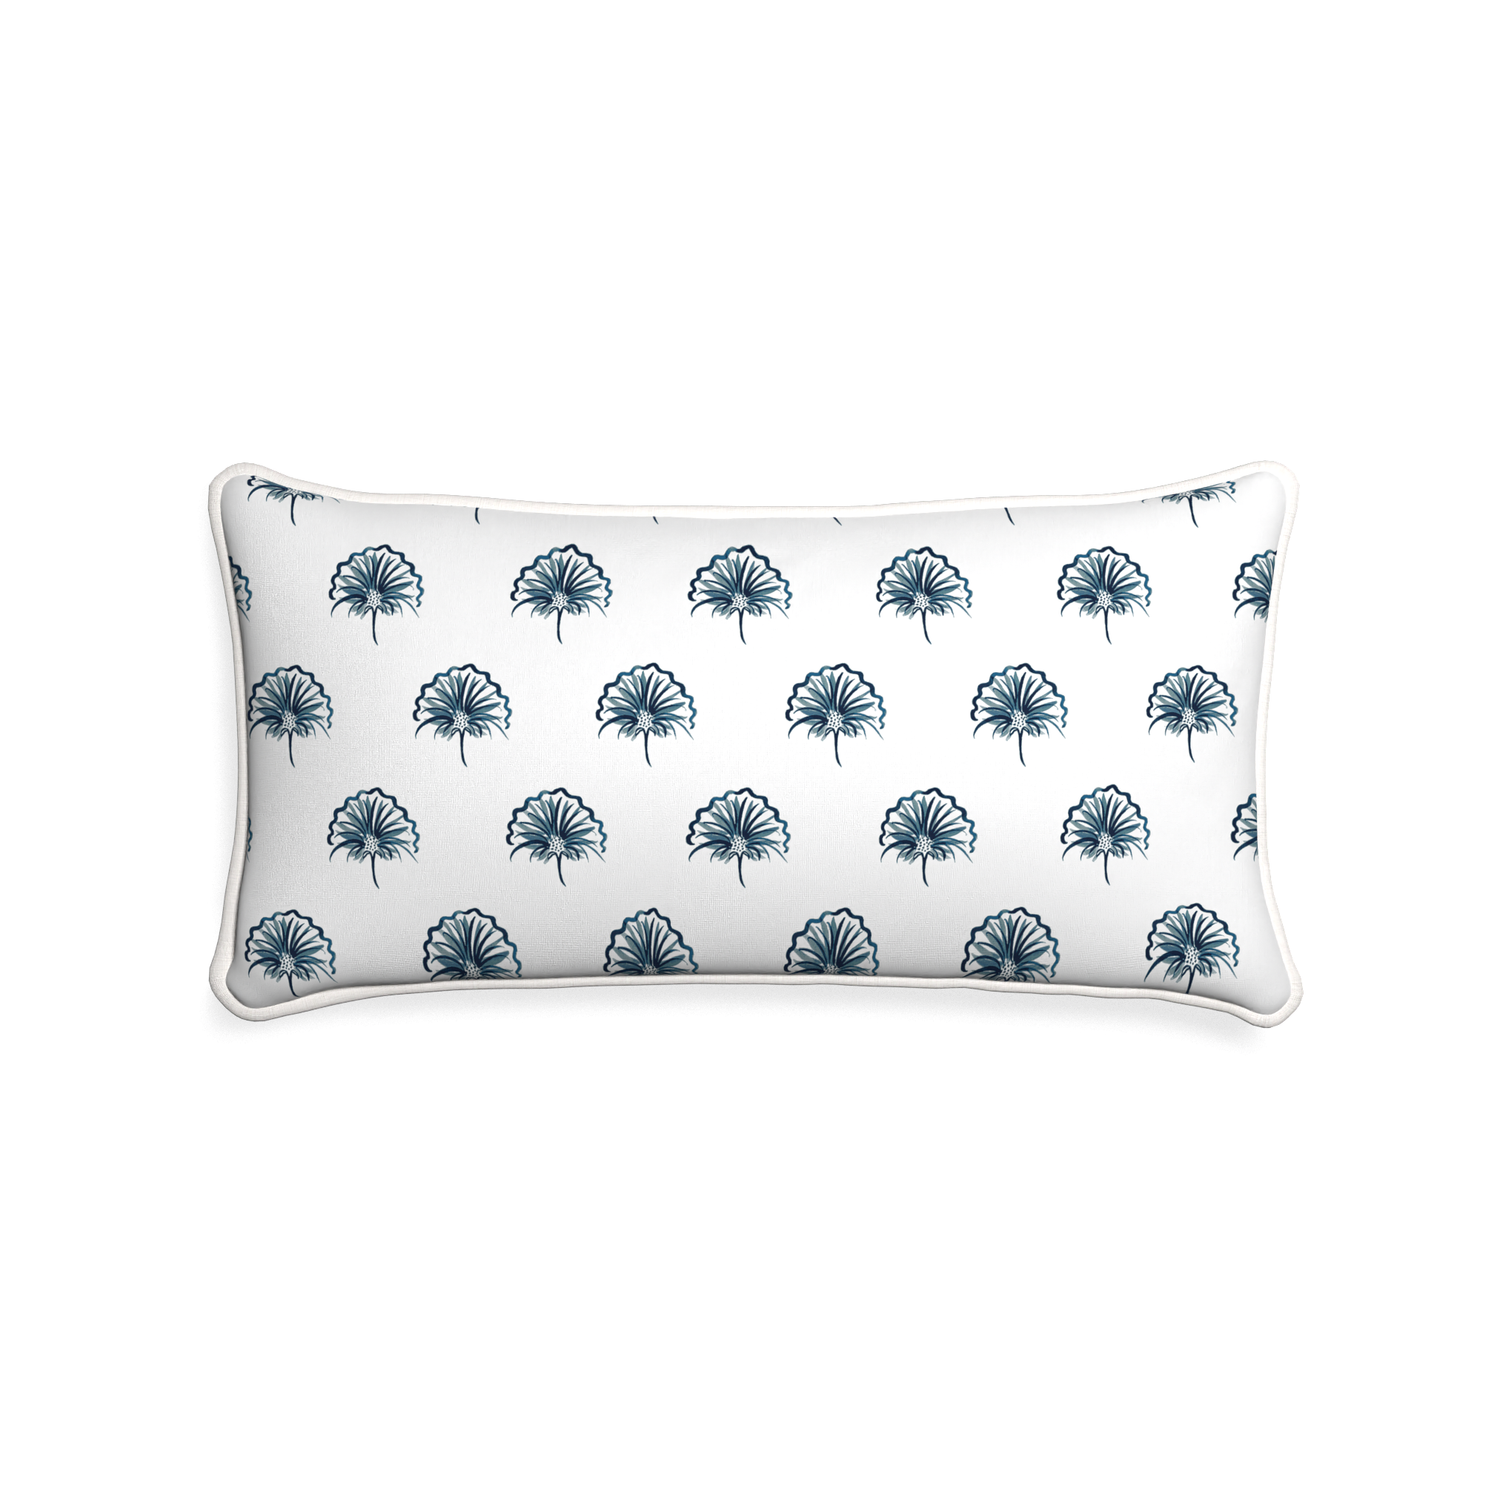 Midi-lumbar penelope midnight custom floral navypillow with snow piping on white background